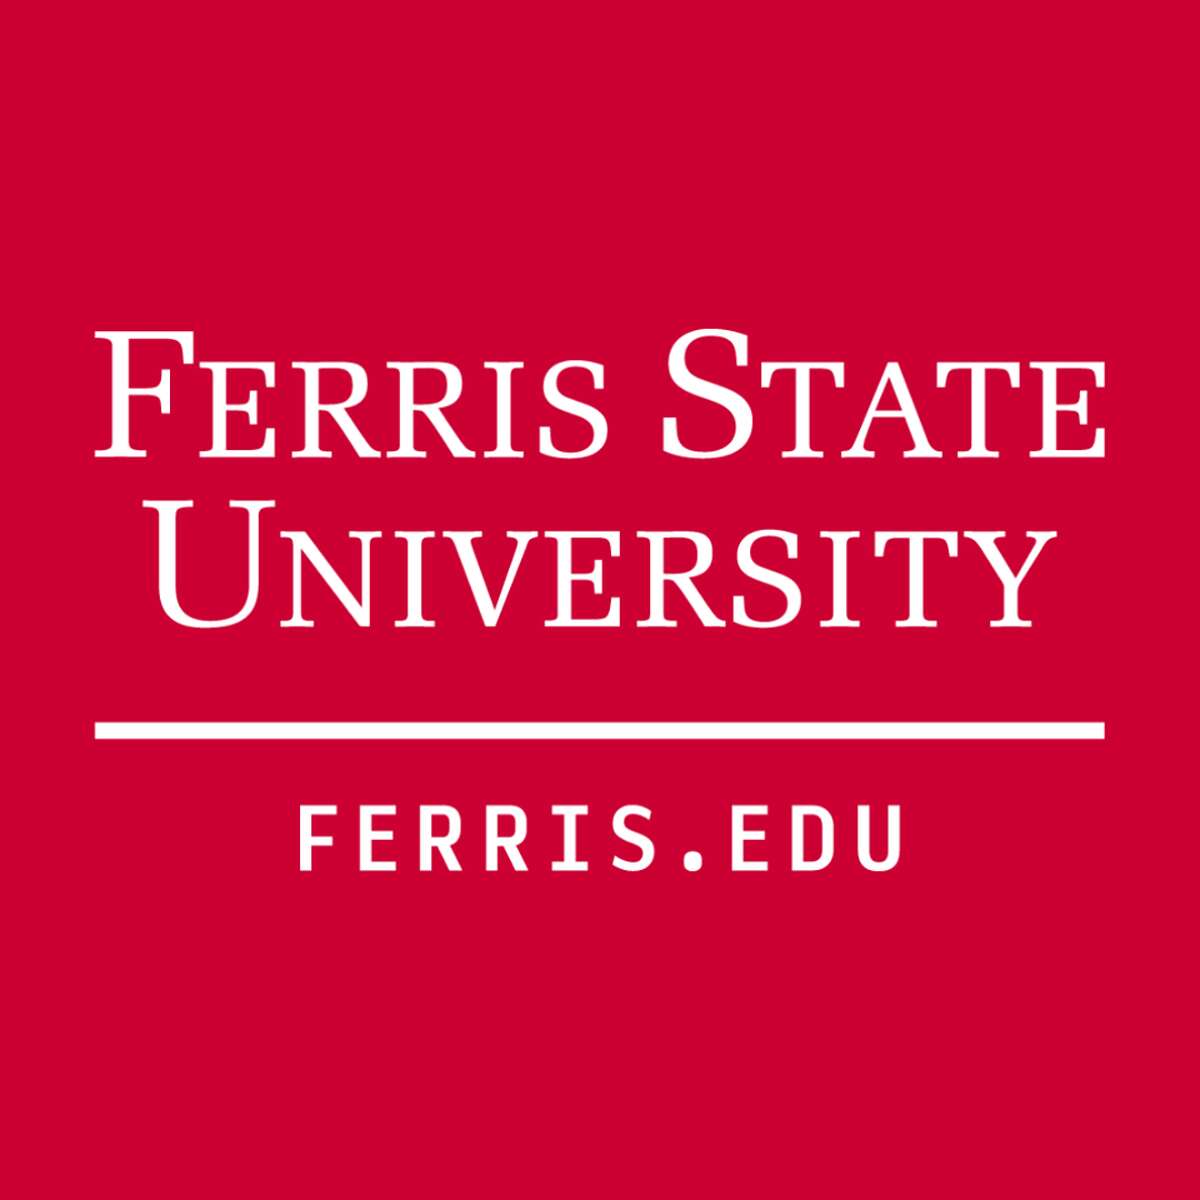 Ferris State University, on Tuesday, announced its plan to reopen campus for the fall 2020 semester.